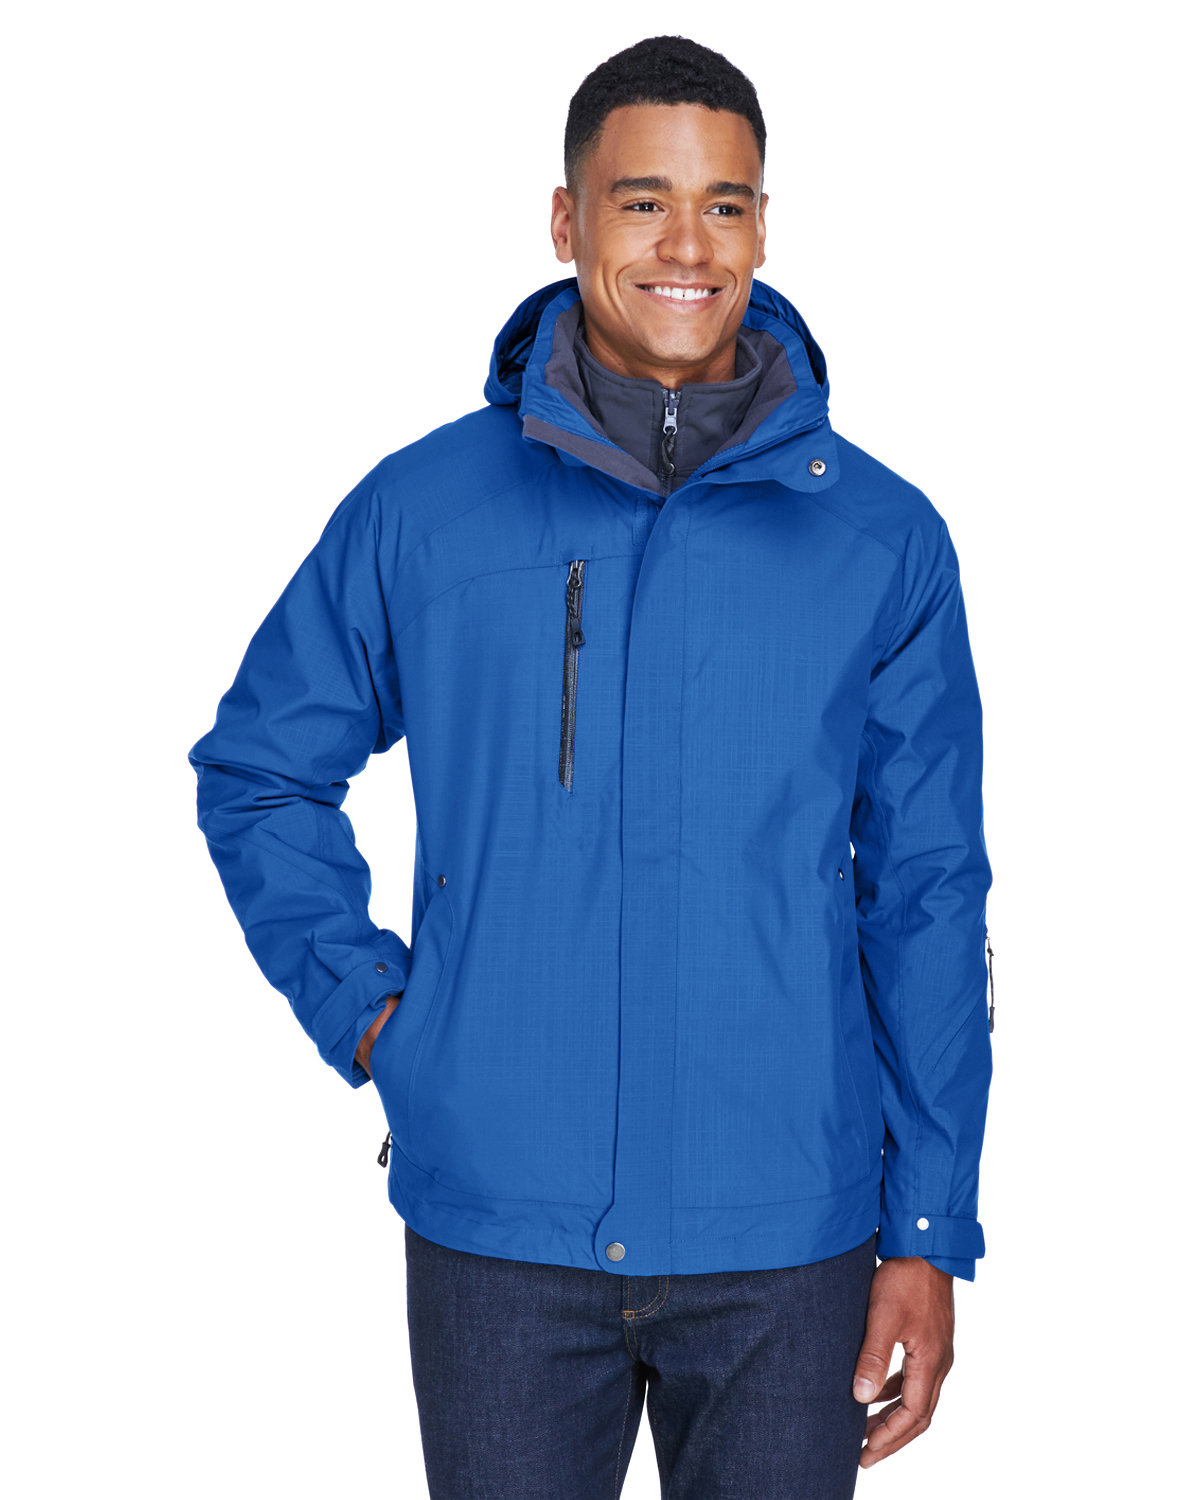 North End Men's Caprice 3-in-1 Jacket with Soft Shell Liner NAUTICAL BLUE 